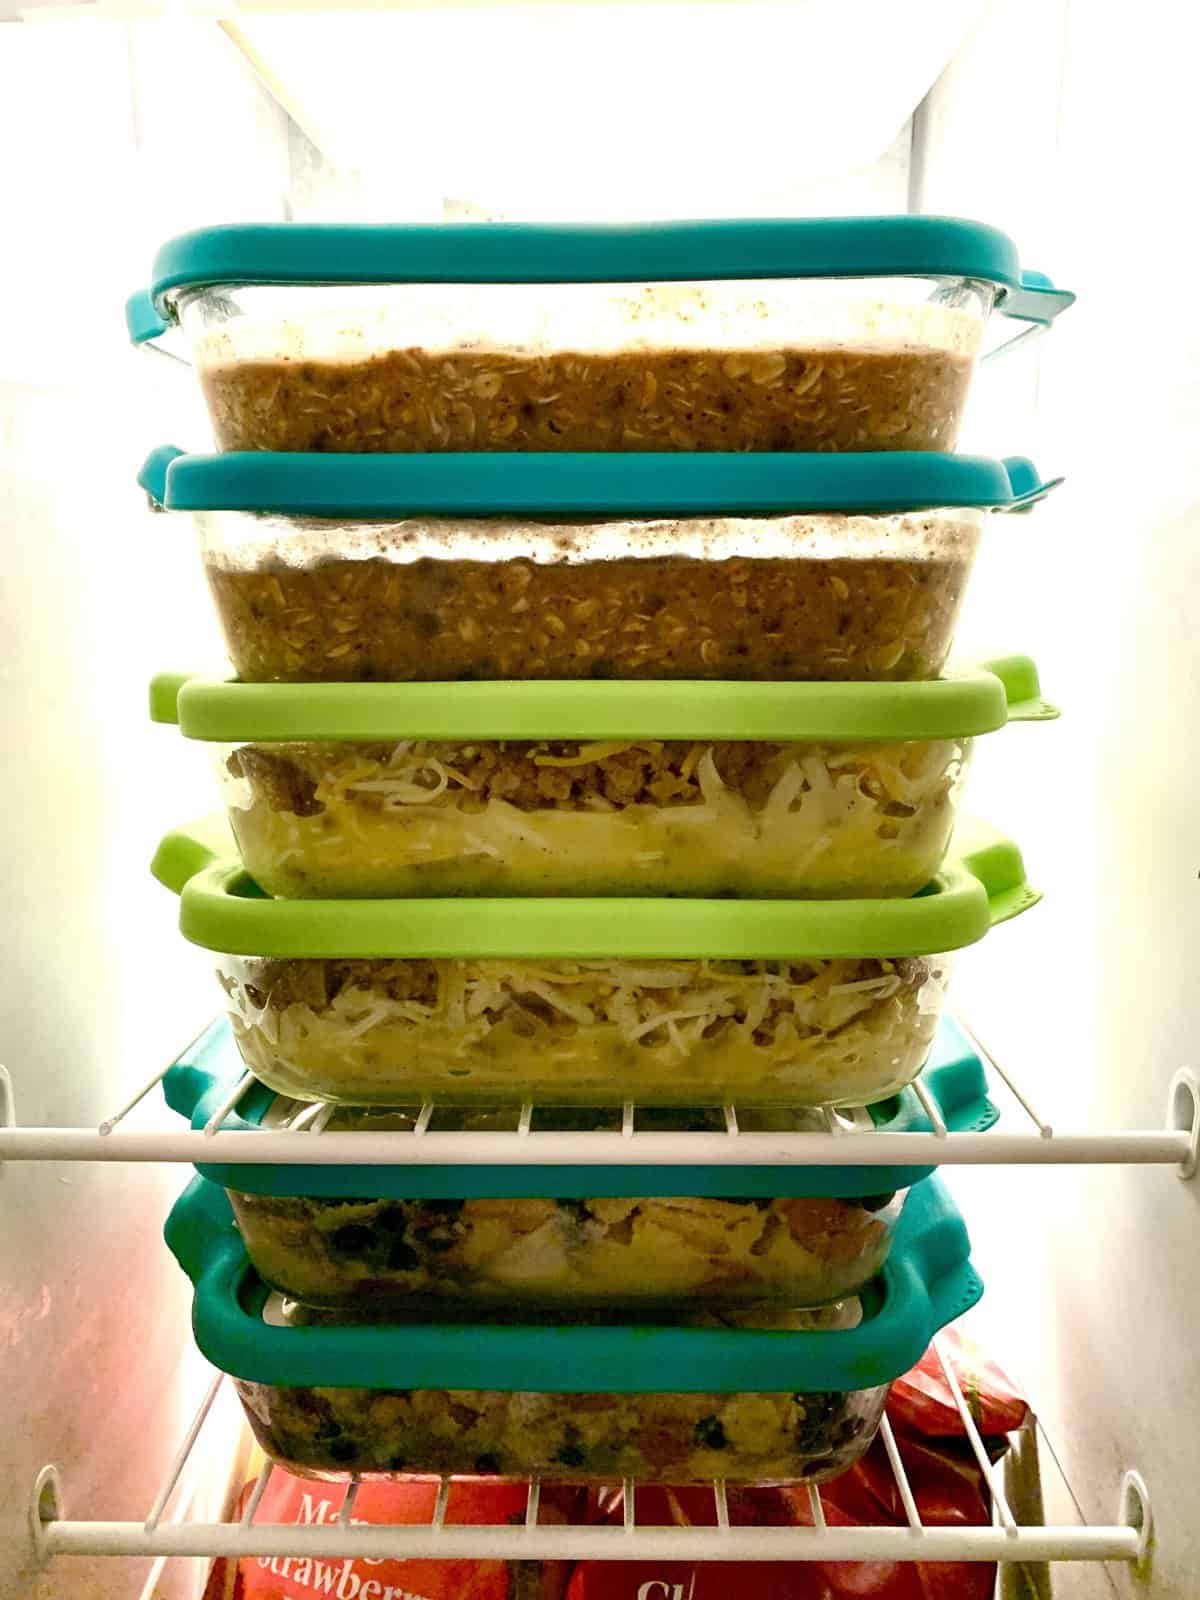 A stack of freezer meals in glass dishes with lids in a freezer.